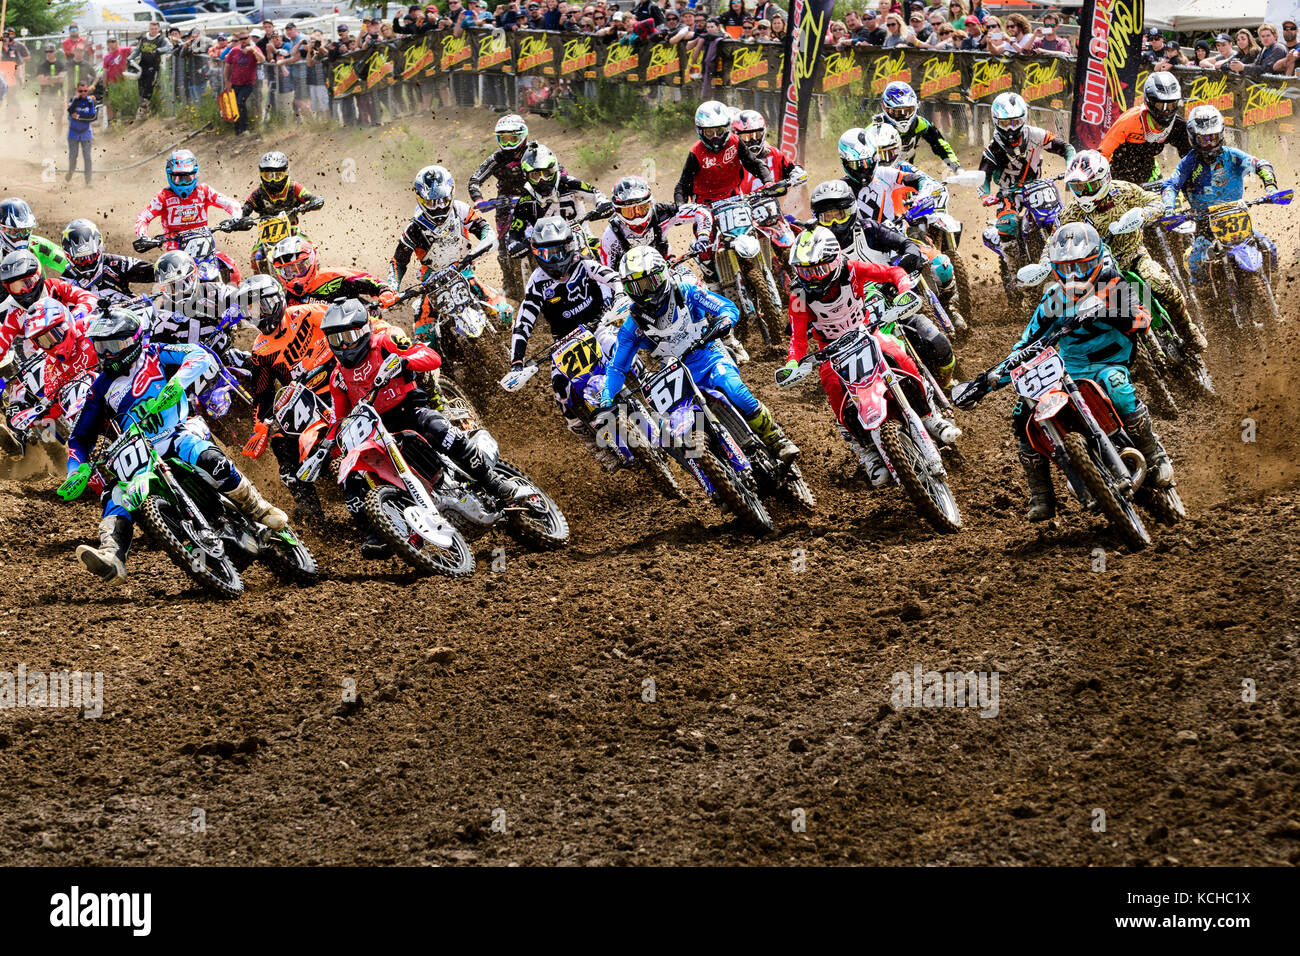 Racing action during the Rockstar Energy Drink Motocross Nationals at the Wastelands in Nanaimo, British Columbia. Stock Photo